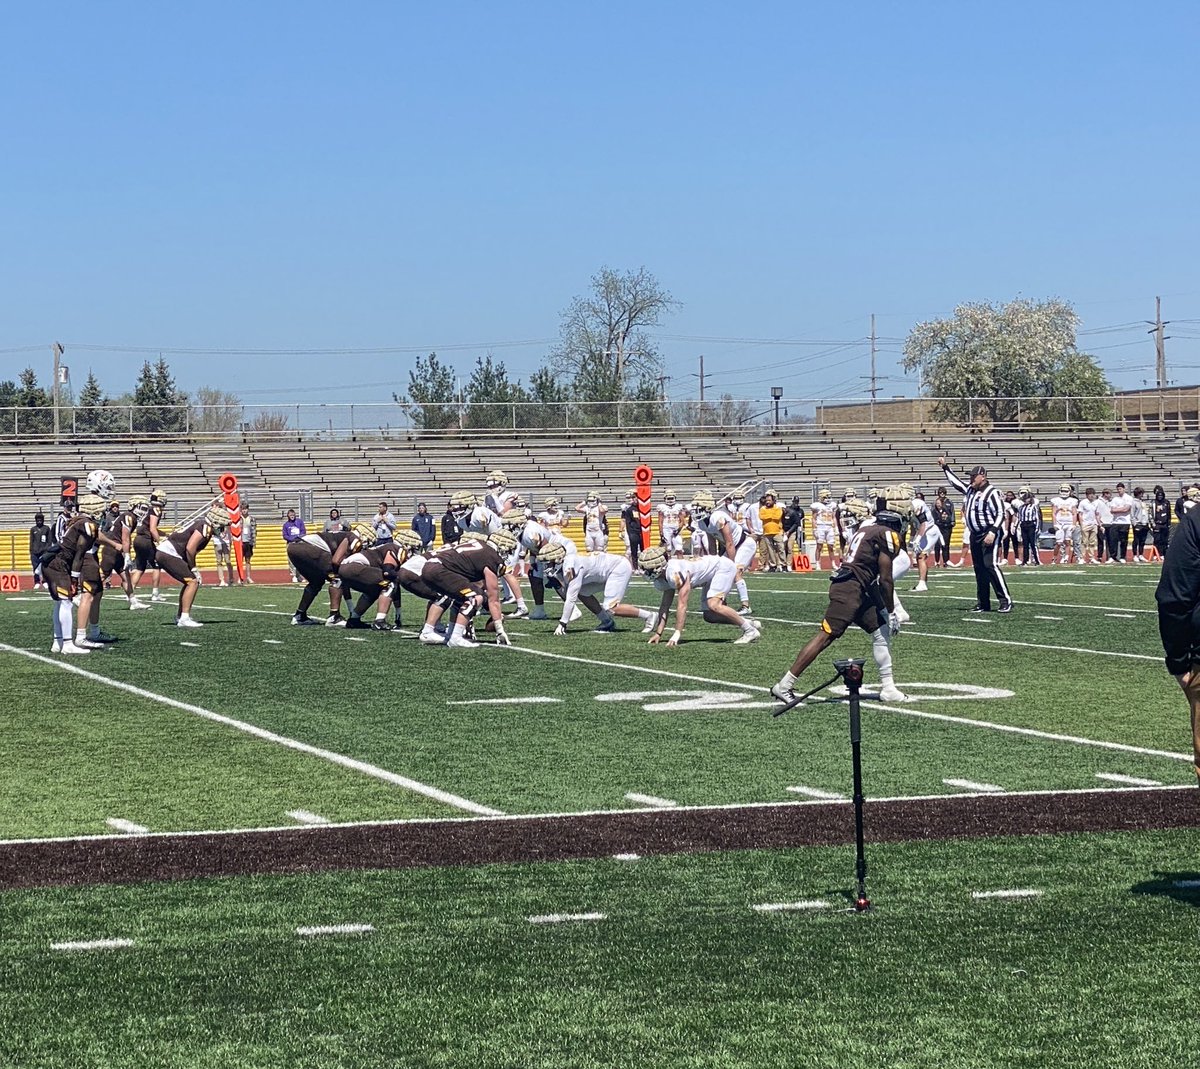 Grateful for my time seeing the beautiful campus @valpoufootball! Thank you @CoachBrewster50 for the Junior Day invite and conversation we had today! @CoachLFox @GaitherFootbal1 @Cowboycoach2016 @BigPlayRay50 @JerisMcIntyre @CSAPrepStar @PrepRedzoneFL @larryblustein @DFO_AJ